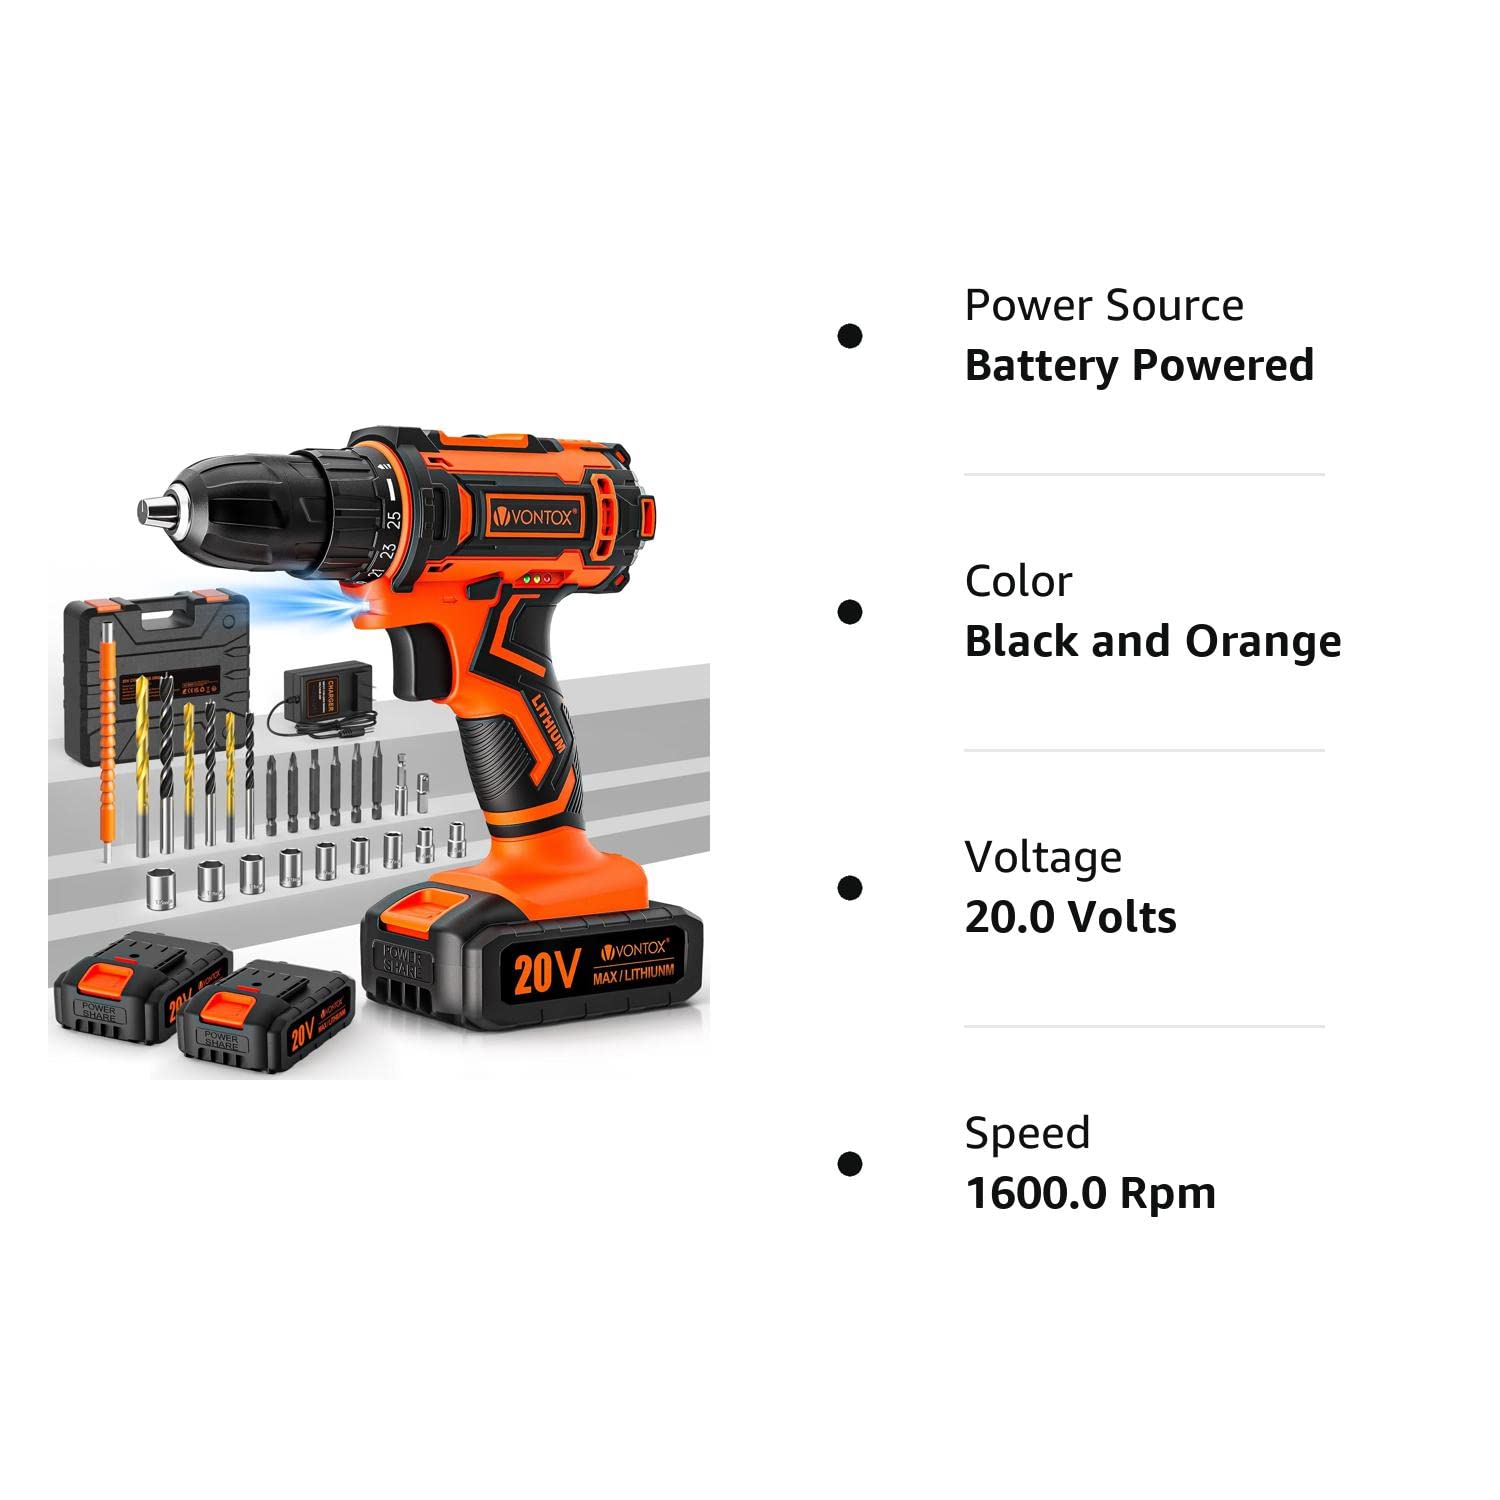 Drill Set, V VONTOX 20V Cordless Drill with 2 Batteries 2.0AH & Fast Charger, Home Power Drill 3/8